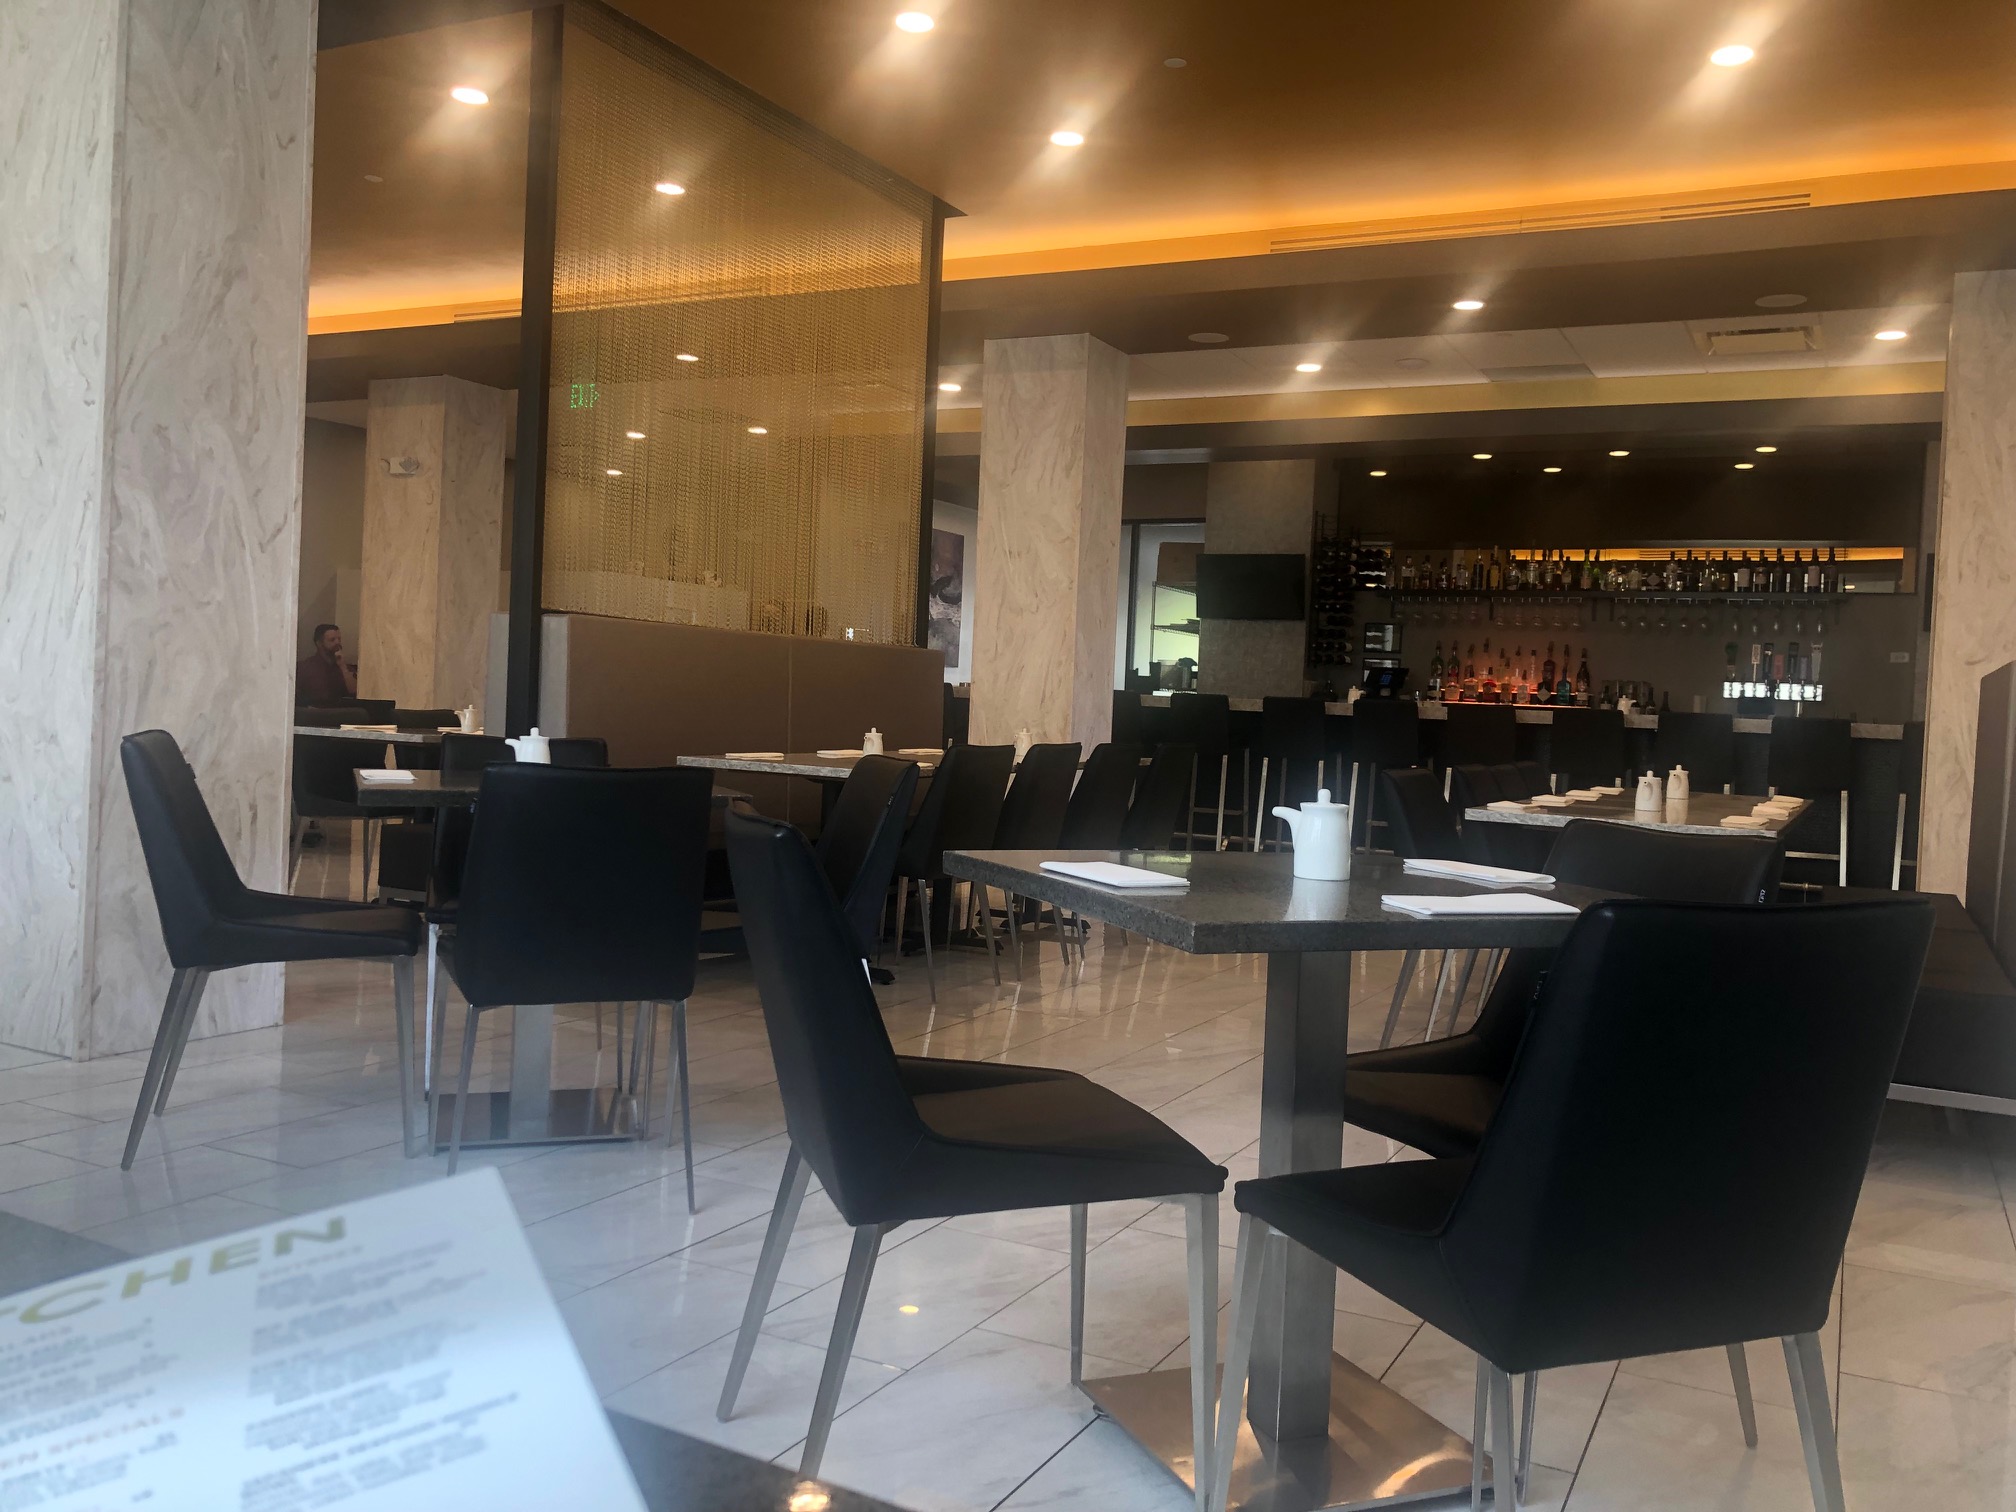 In the dining room, there are several empty tables with black chairs on a marble floor in the new KoFusion location in Downtown Champaign. Photo by Alyssa Buckley.